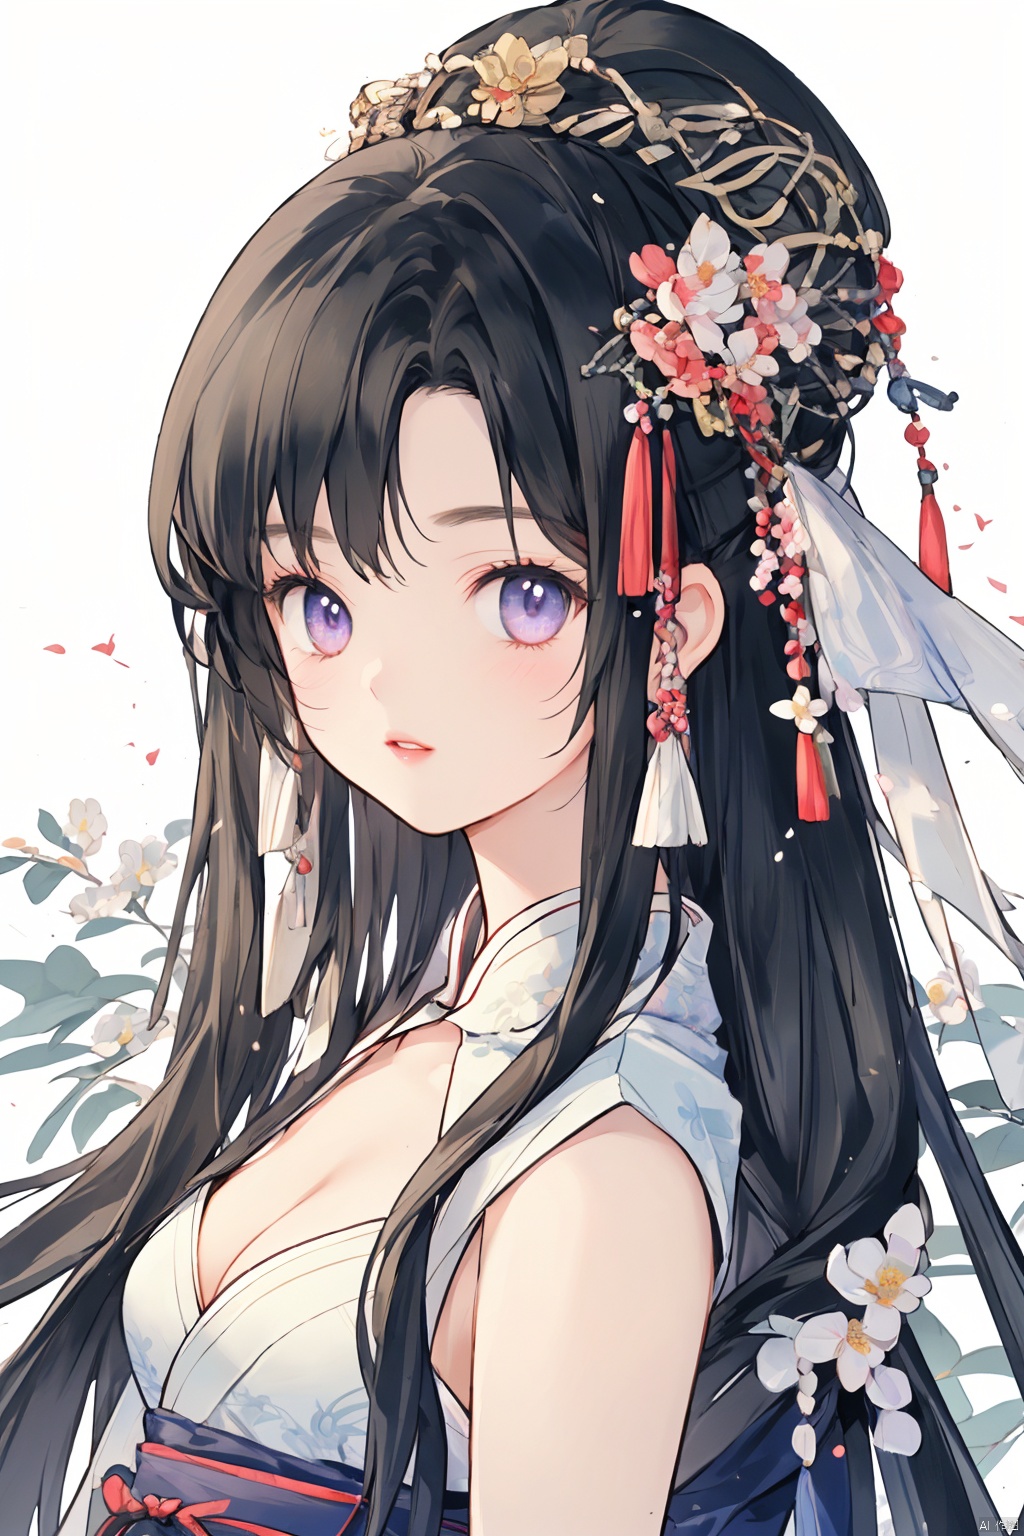  (Masterpiece:1.2, high quality),(pixiv:1.4),Eyebrows like willow leaves,The face is as beautiful as a flower,the eyes are tender. Small waist,big breasts,revealing cleavage; Lips slightly open,seductive expression.,girl,, mwuxia, mxianv